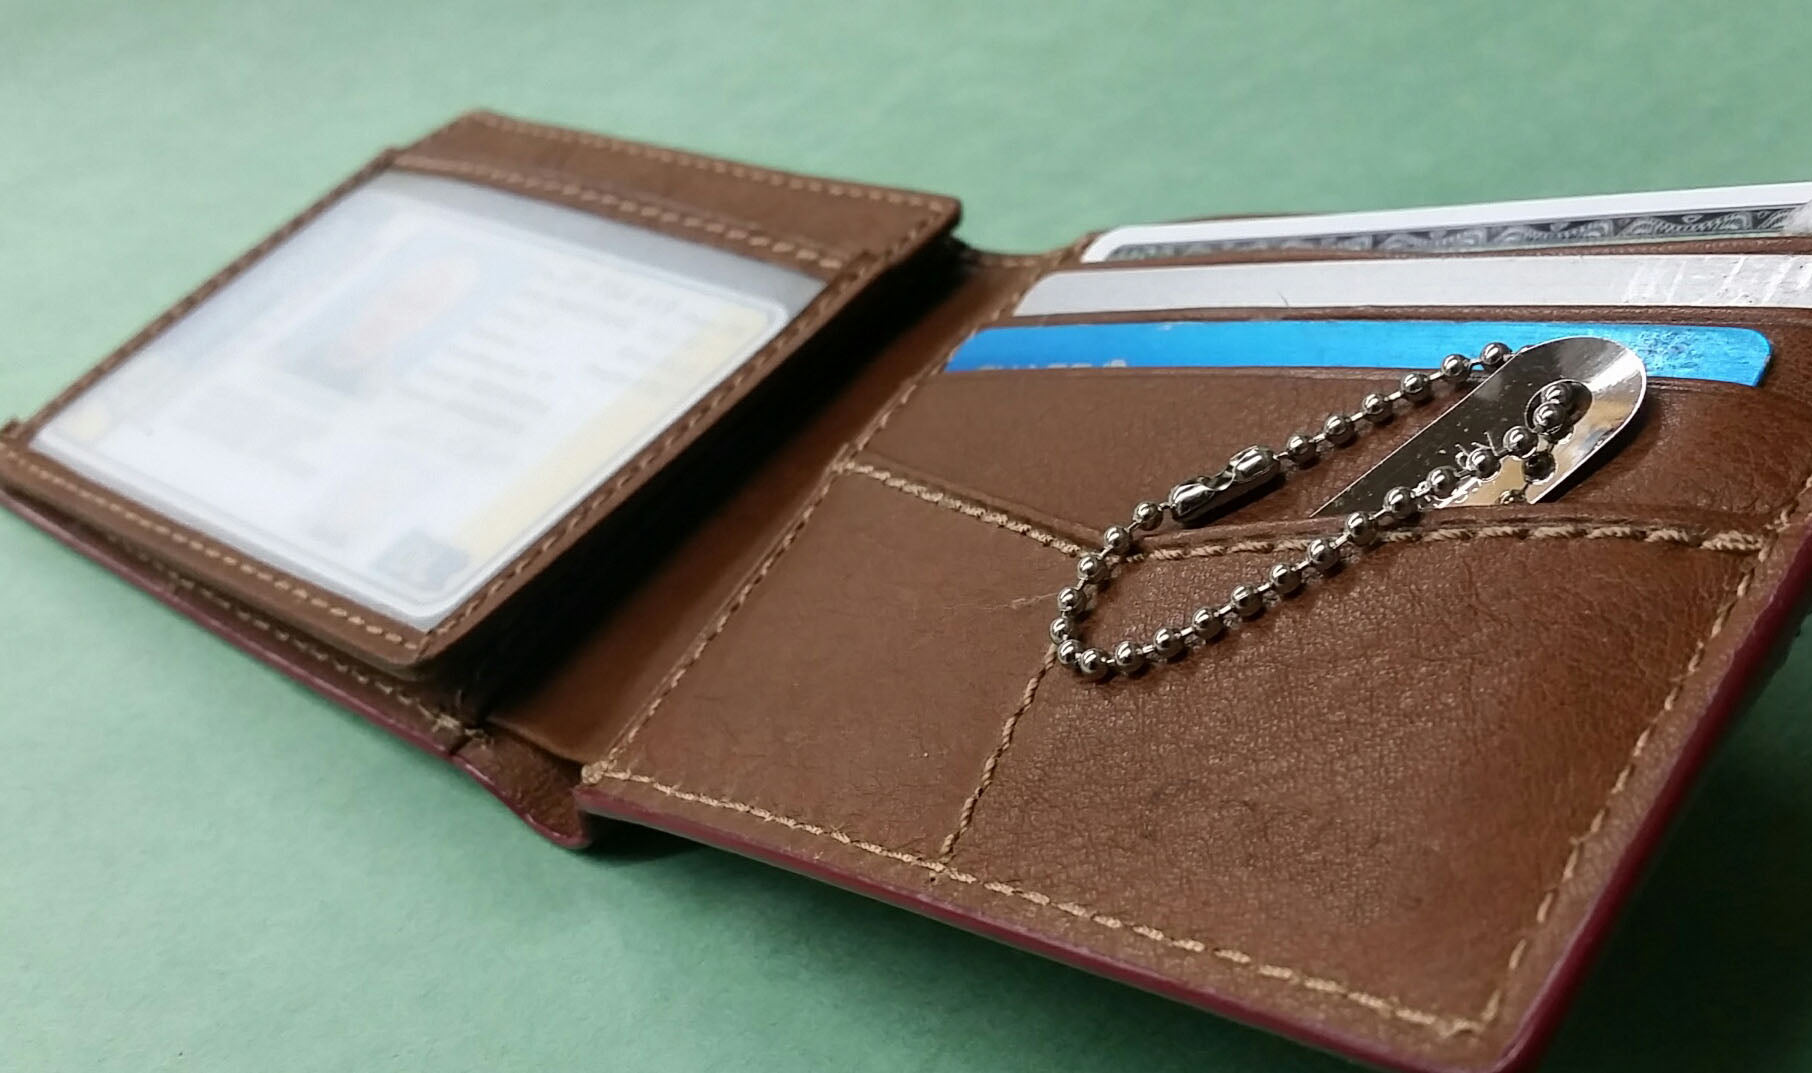 ProTick Remedy shown in wallet without magnifier